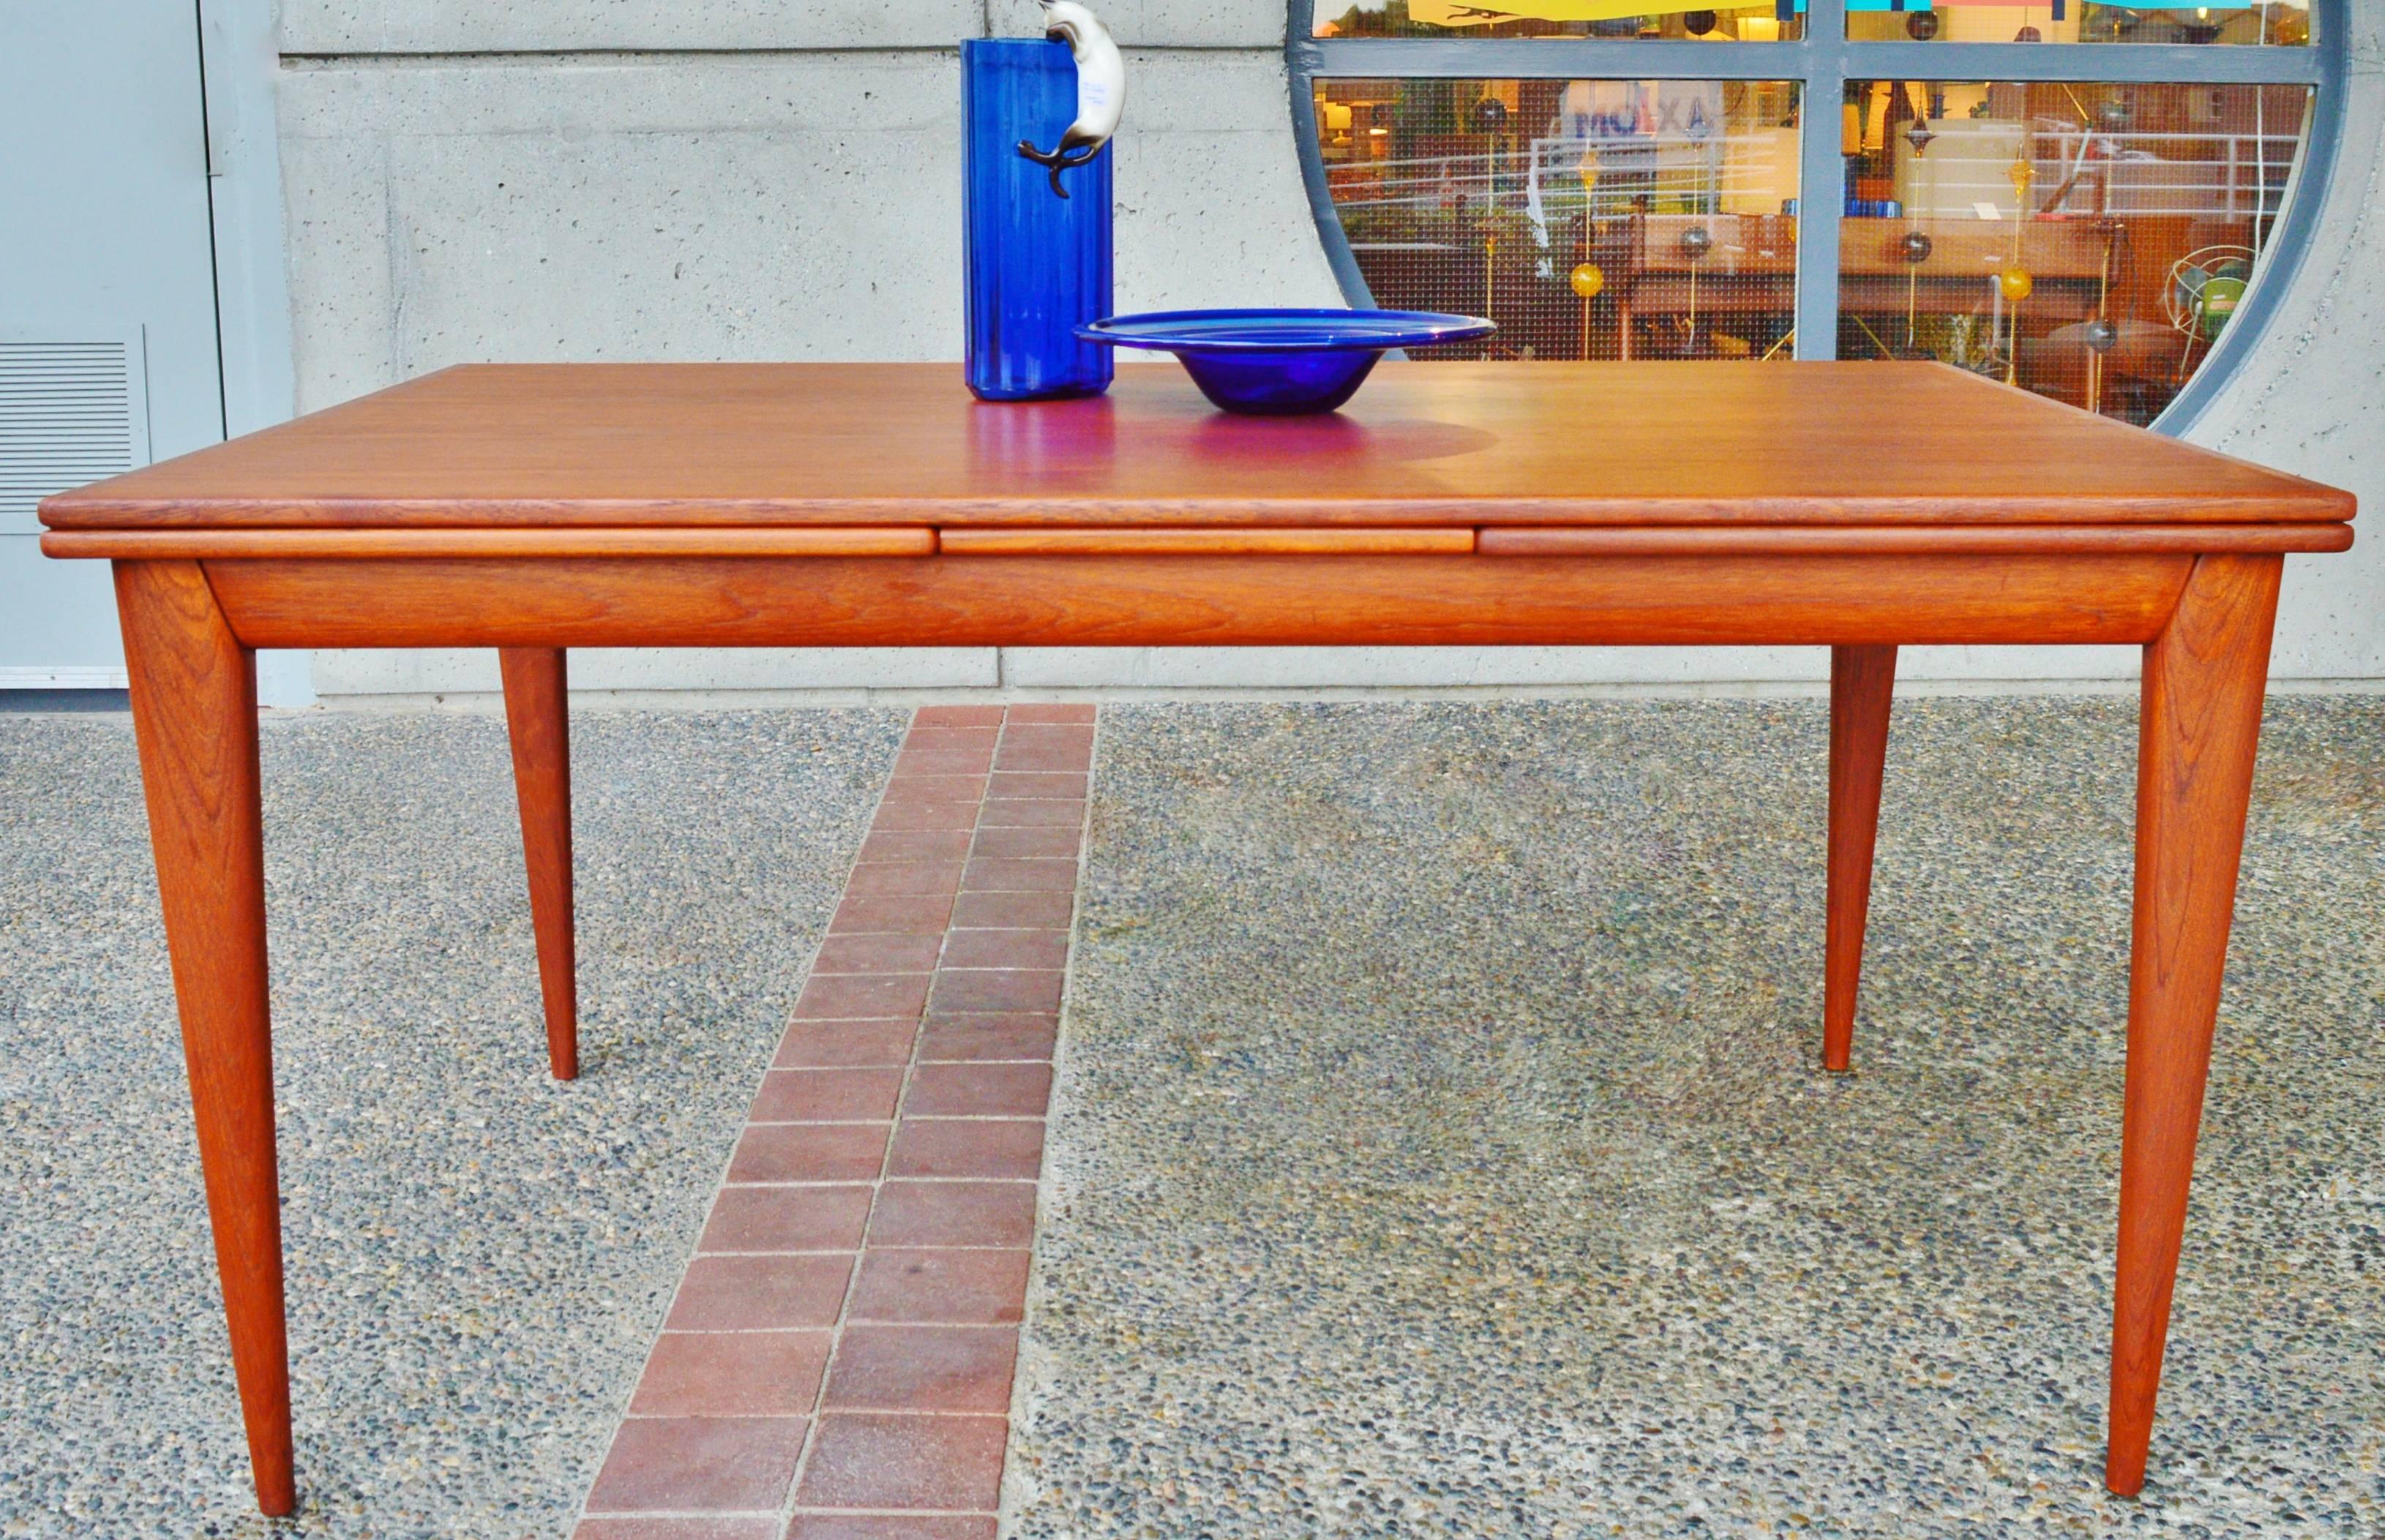 This impeccable and rare Danish Modern teak dining table or writing table was designed by Niels Otto Moller for J.L. Moller in the 1950s and is top quality construction throughout. One of the most awesome aspects is the stunning, solid teak